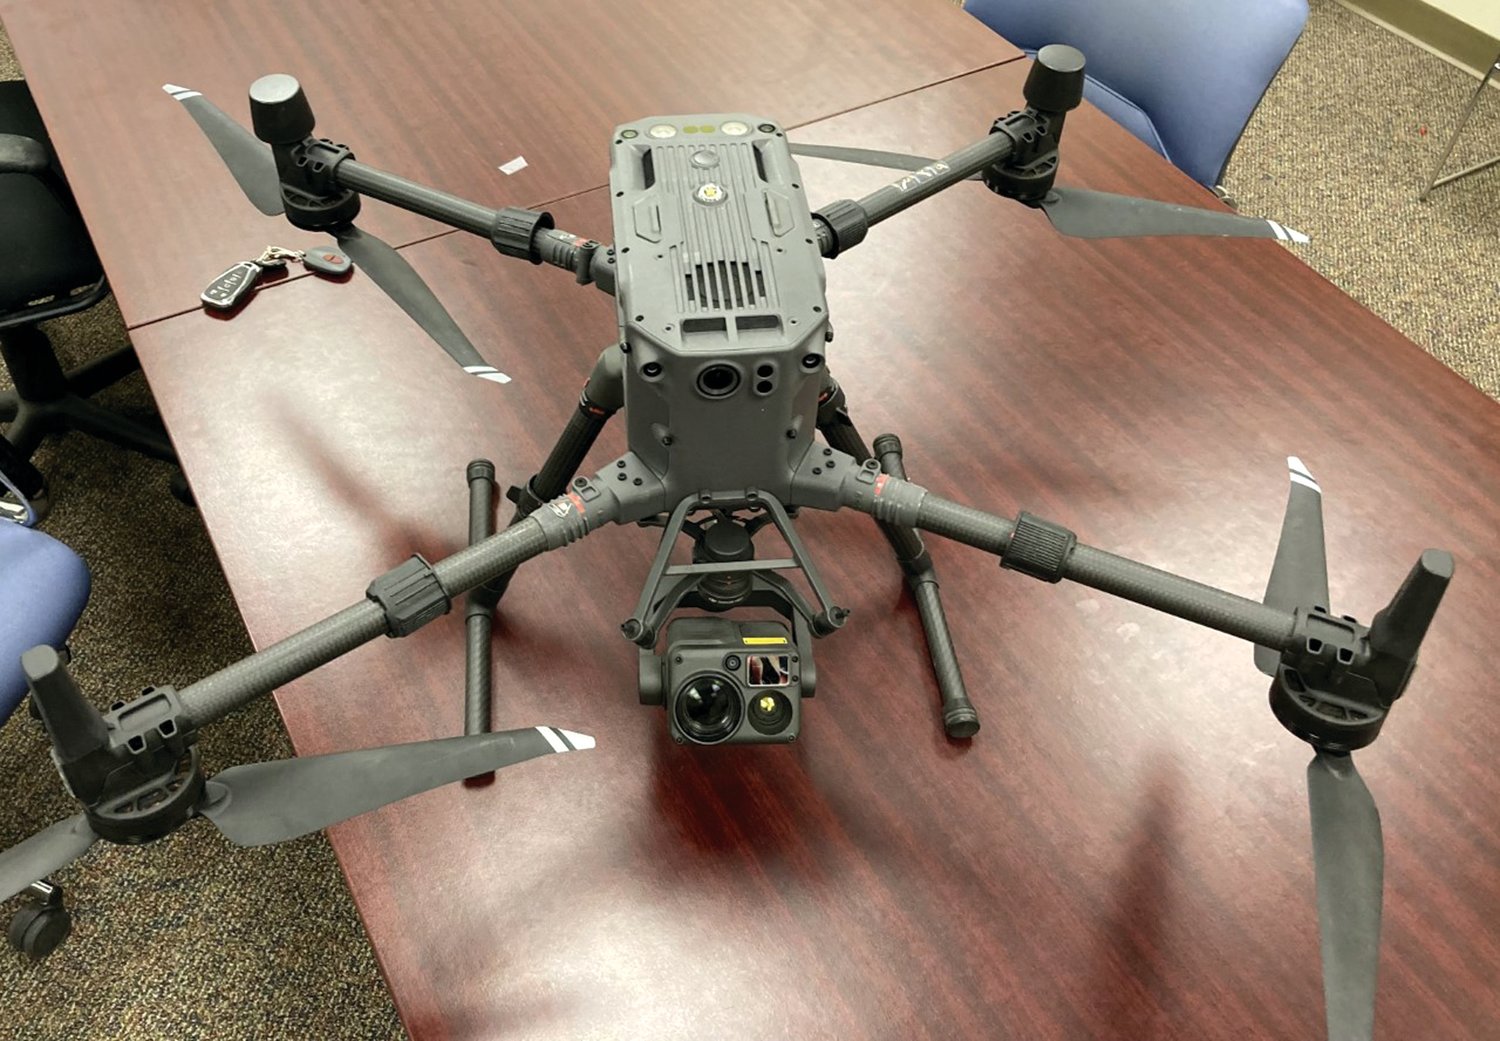 SOARING HIGH: Cranston Police Department’s drone has been used in locating people with Alzheimer’s who have wandered away from home.